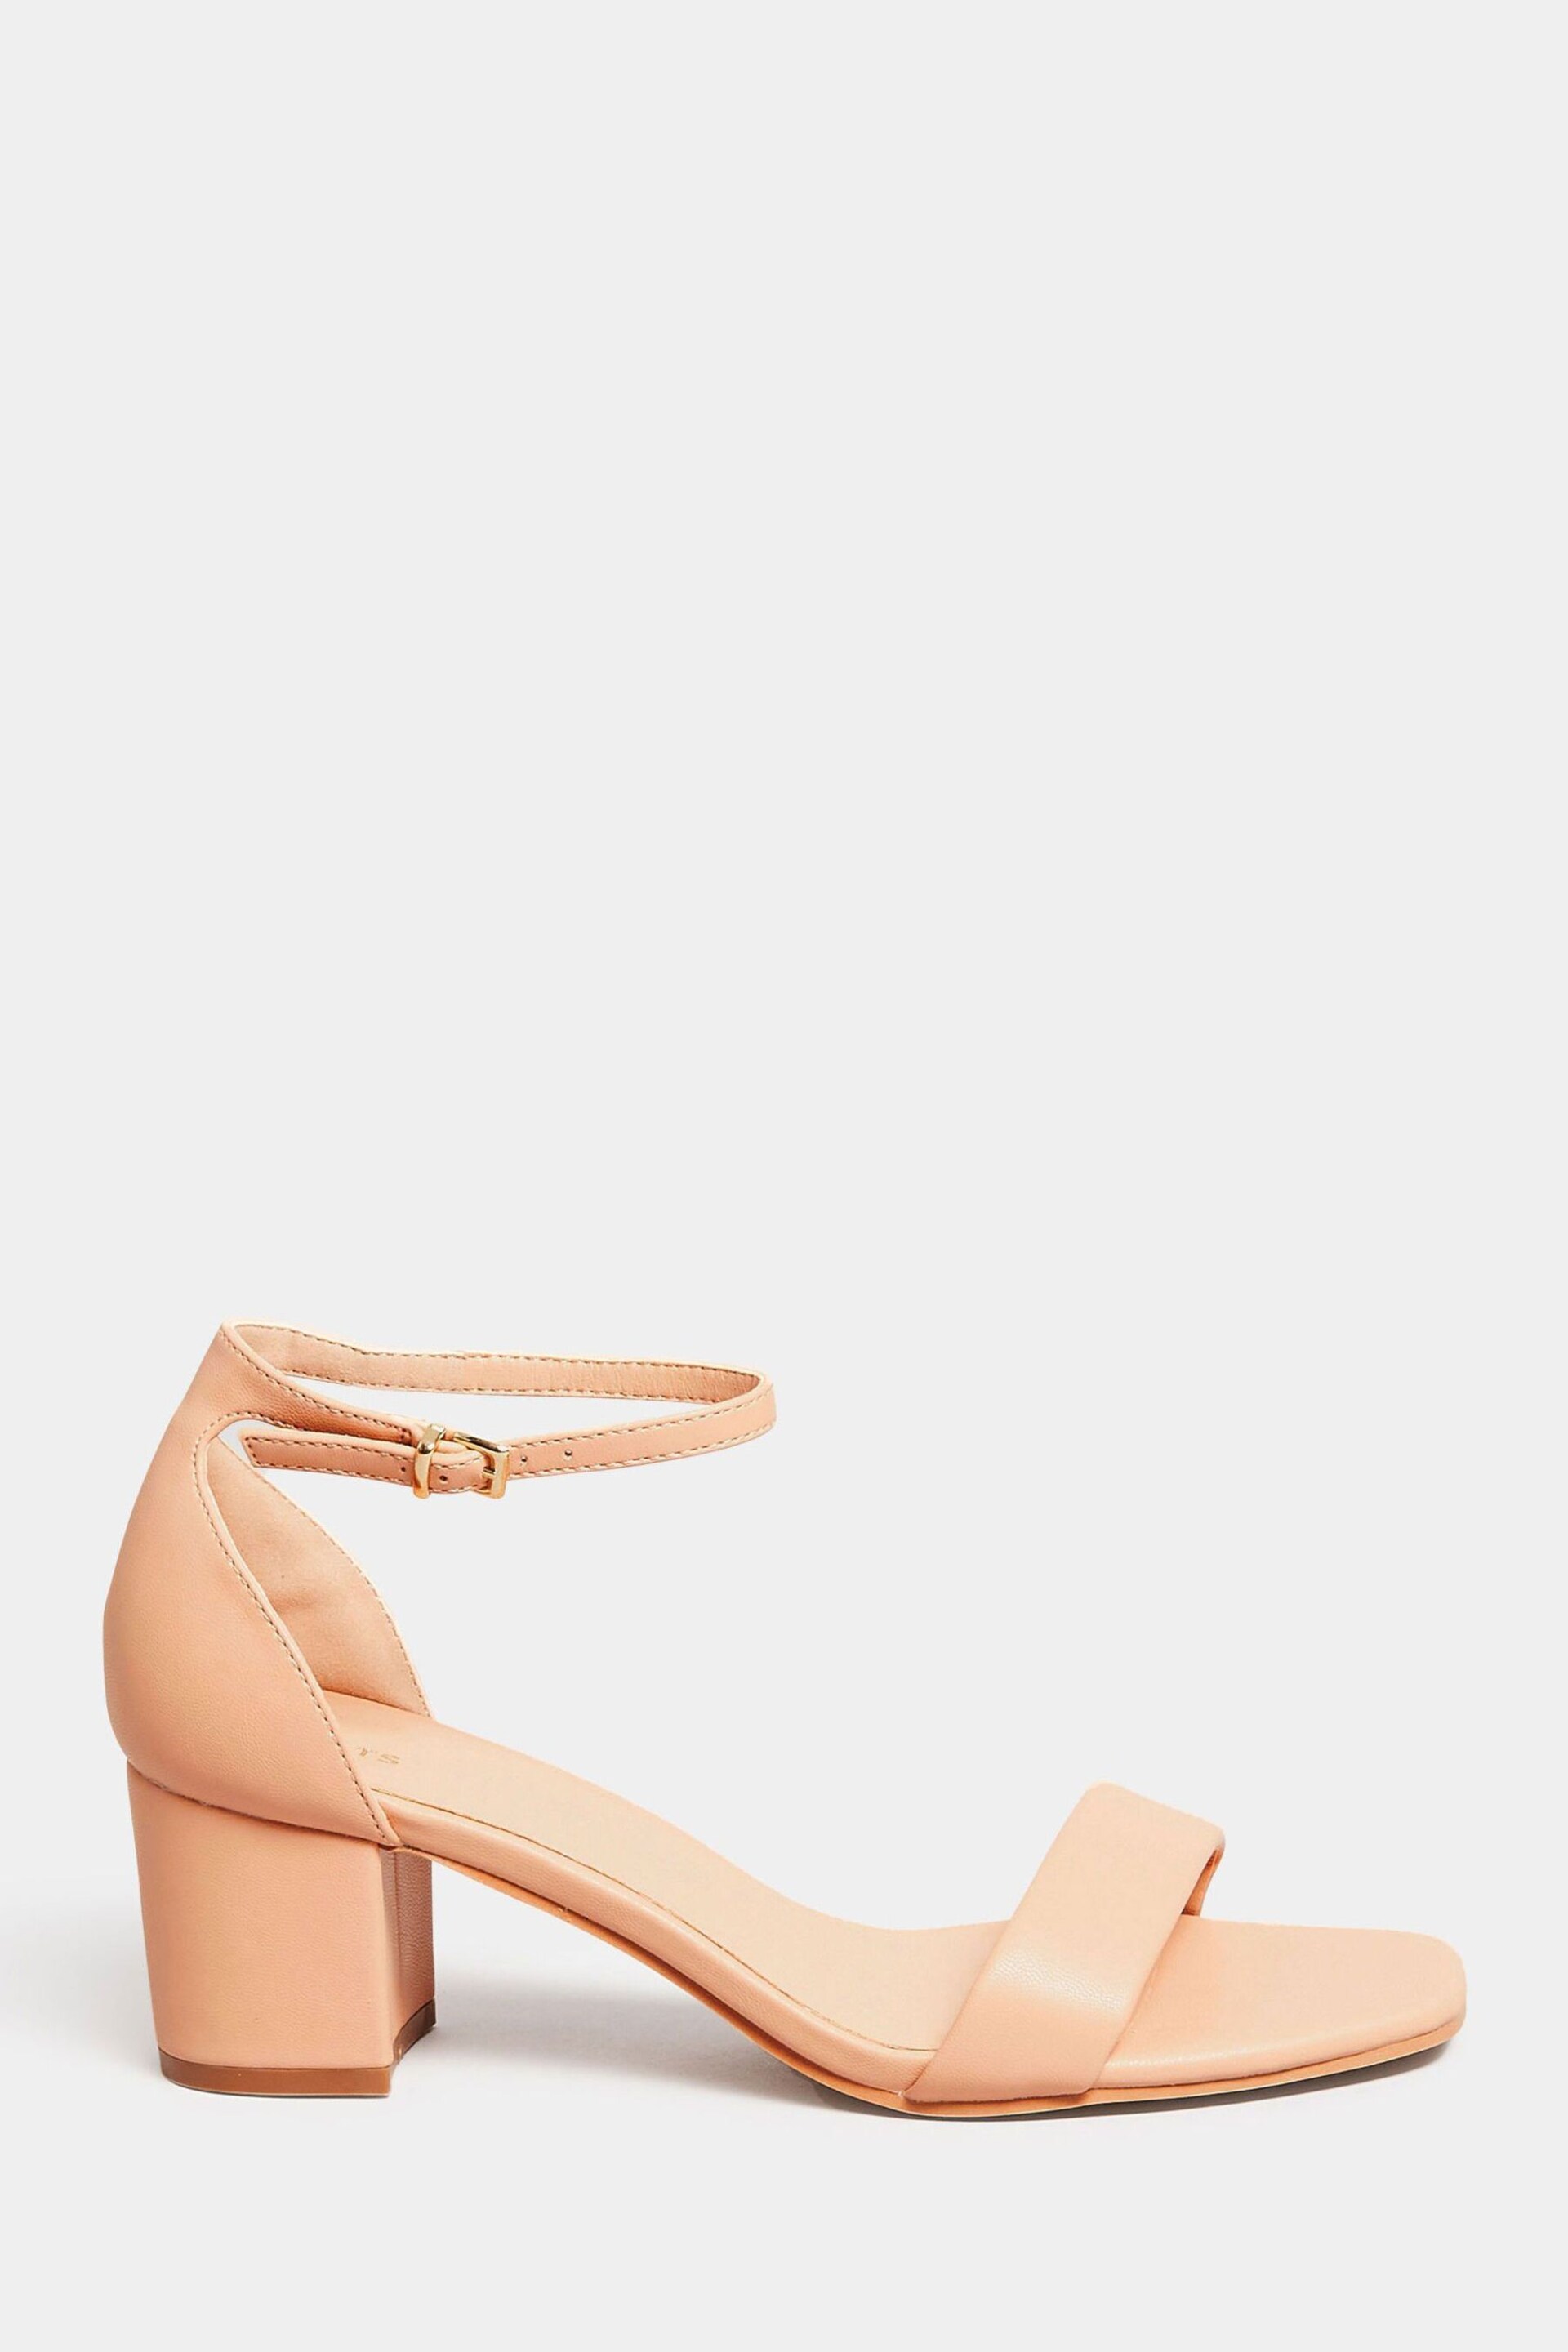 Long Tall Sally Nude Faux Leather Block Heel Sandals - Image 2 of 5